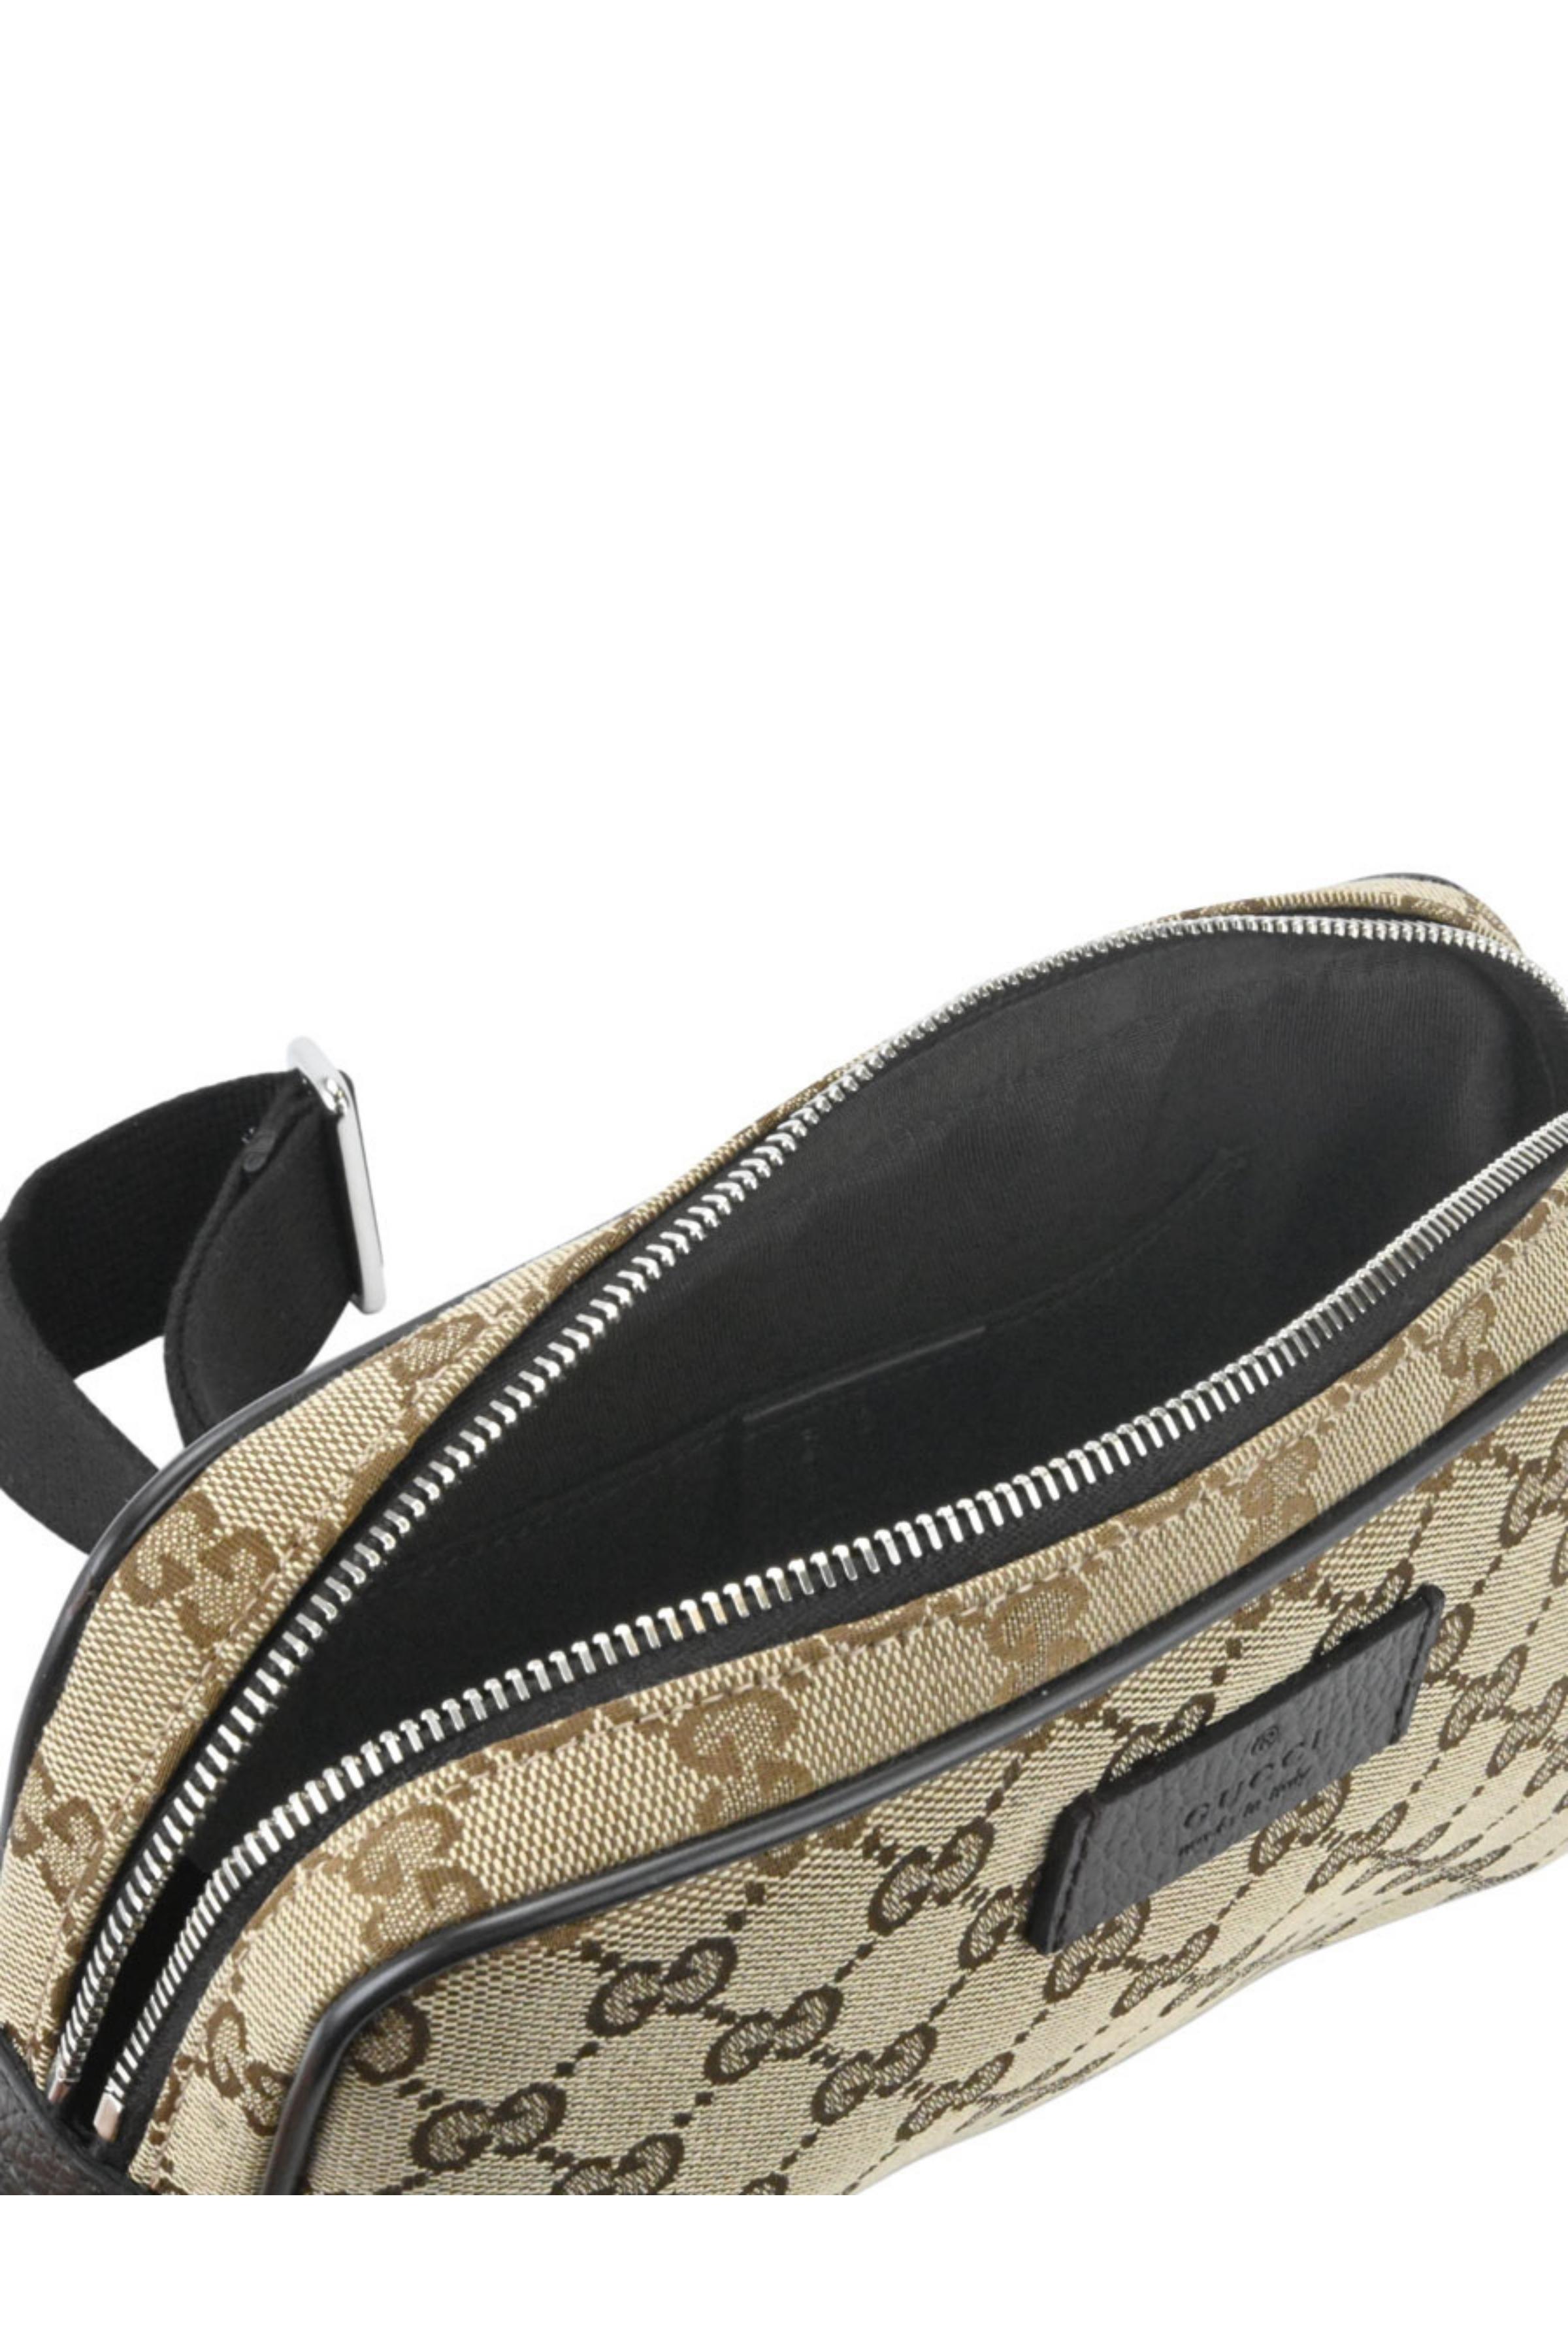 gucci fanny pack